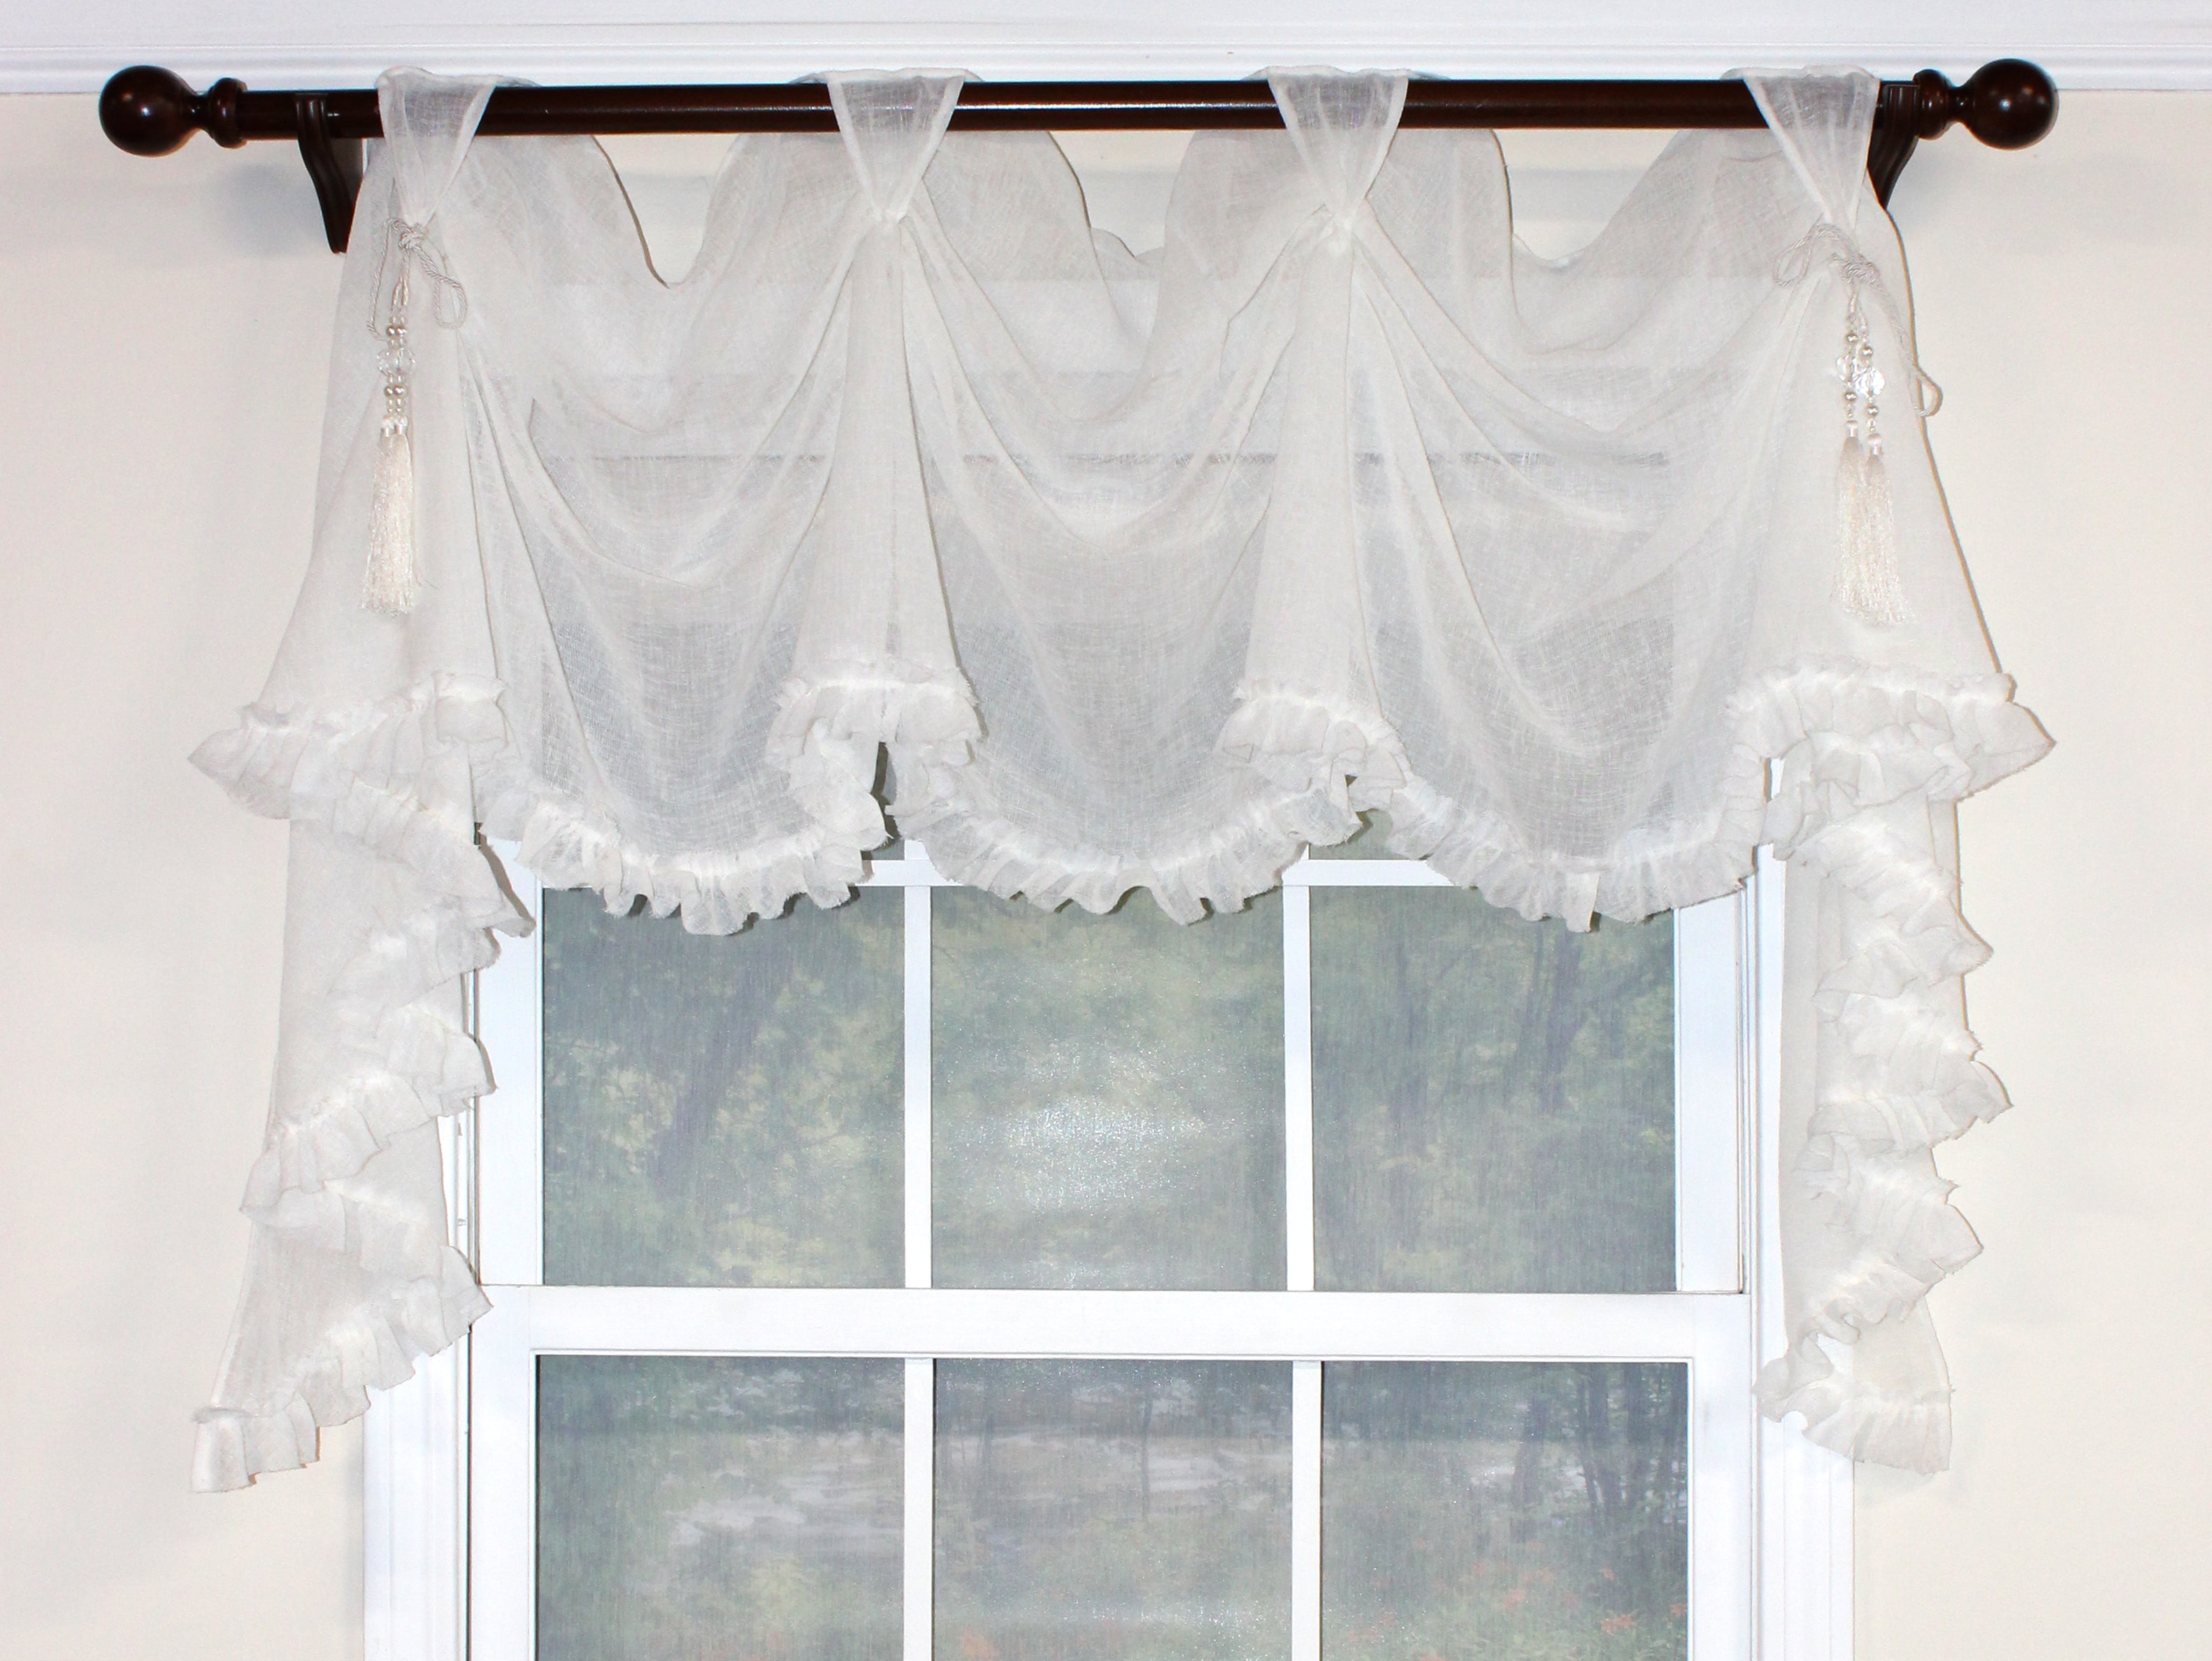 Our Breezy Victory Swag Valance is so shabby chic with its ruffled unfinished edge and optional beaded chair-tie accents. This semi-sheer cotton fabric in the color Cloud, creates a free-flowing and elegant look. Pair with our Breezy Rod Pocket Panels beneath for a heavenly appeal! 